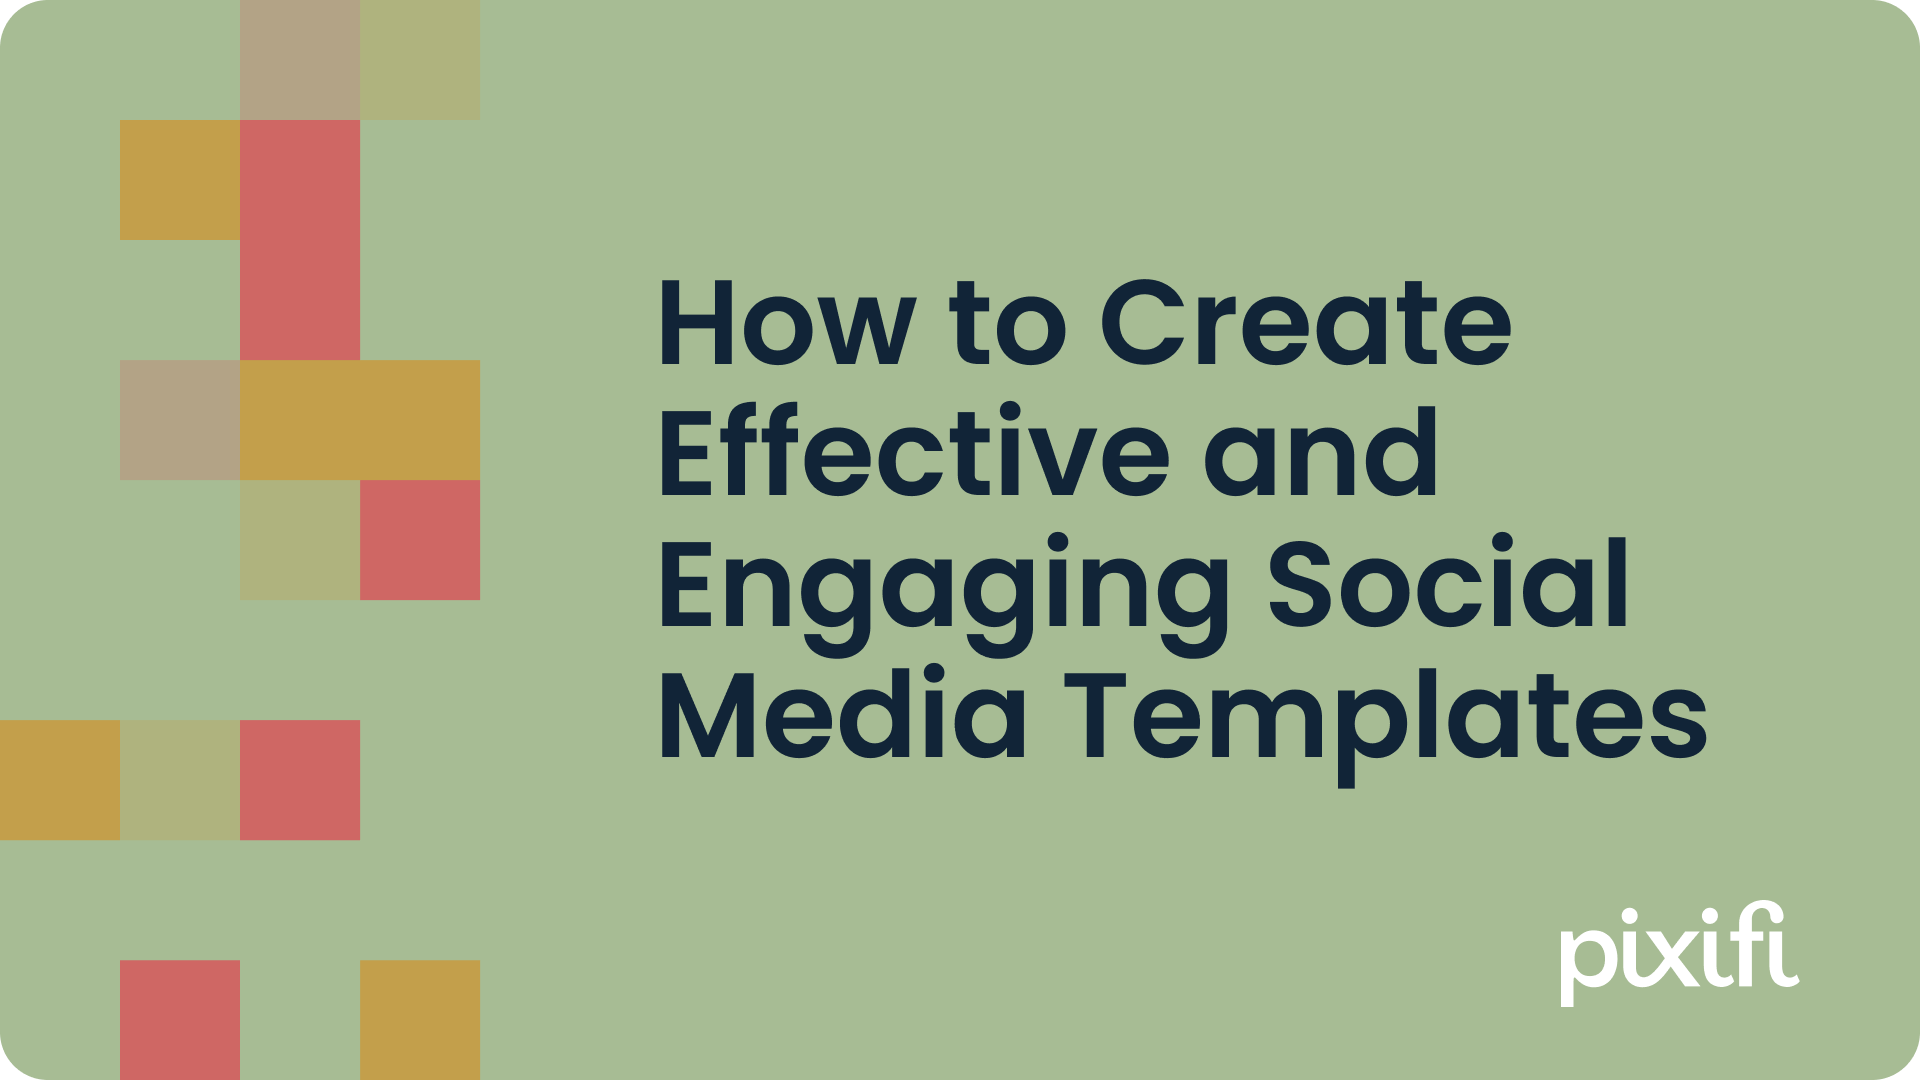 How to Create Effective and Engaging Social Media Templates